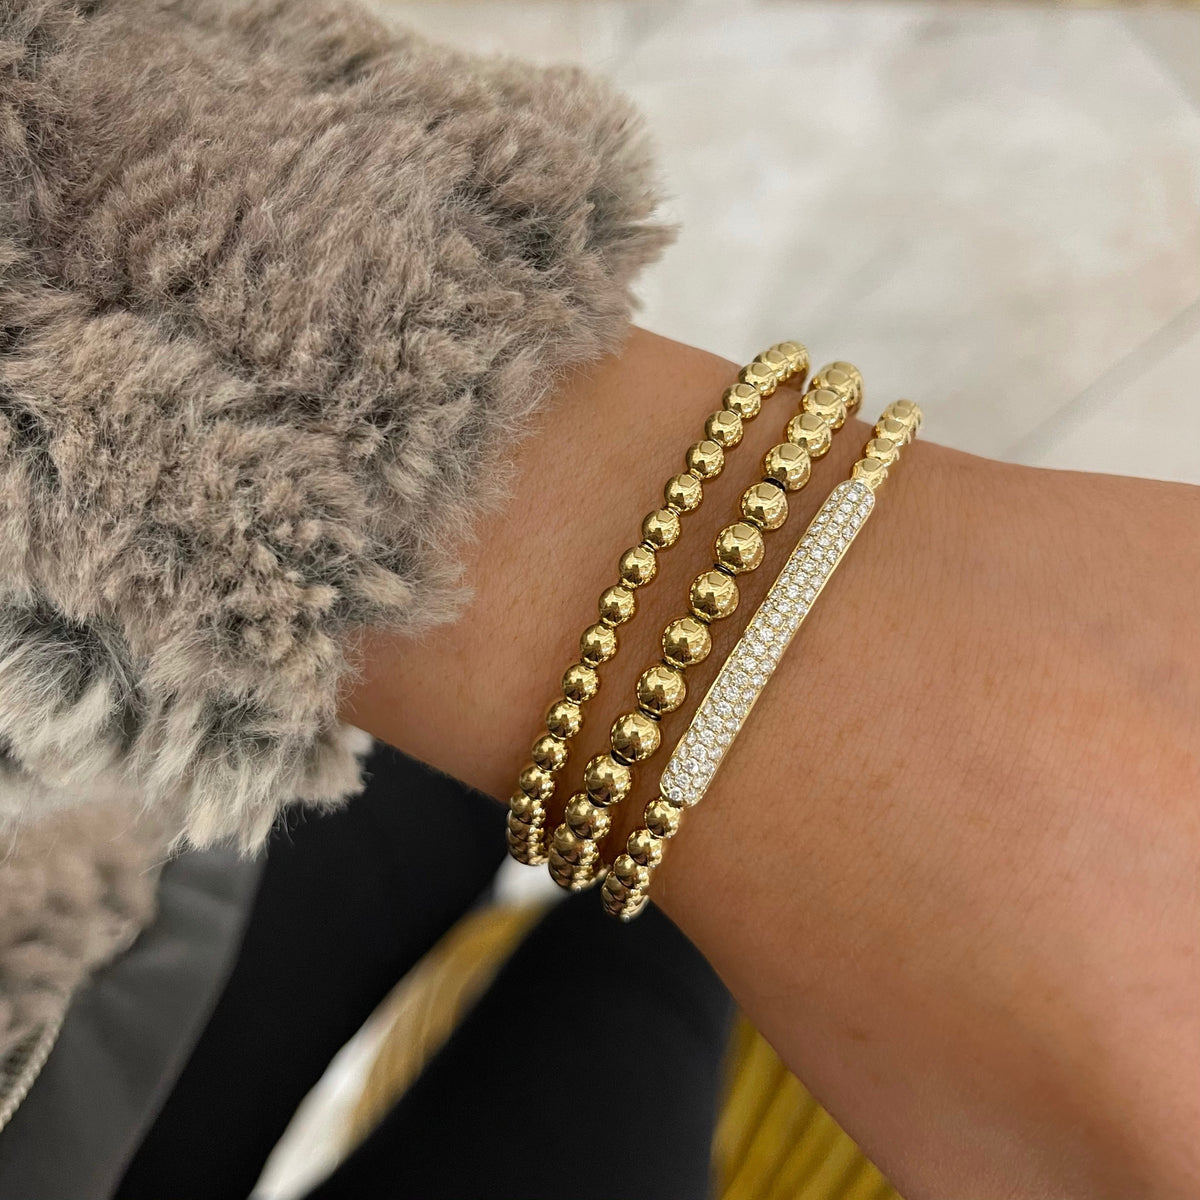 ite and Gold Beaded Bracelet Stack 4mm